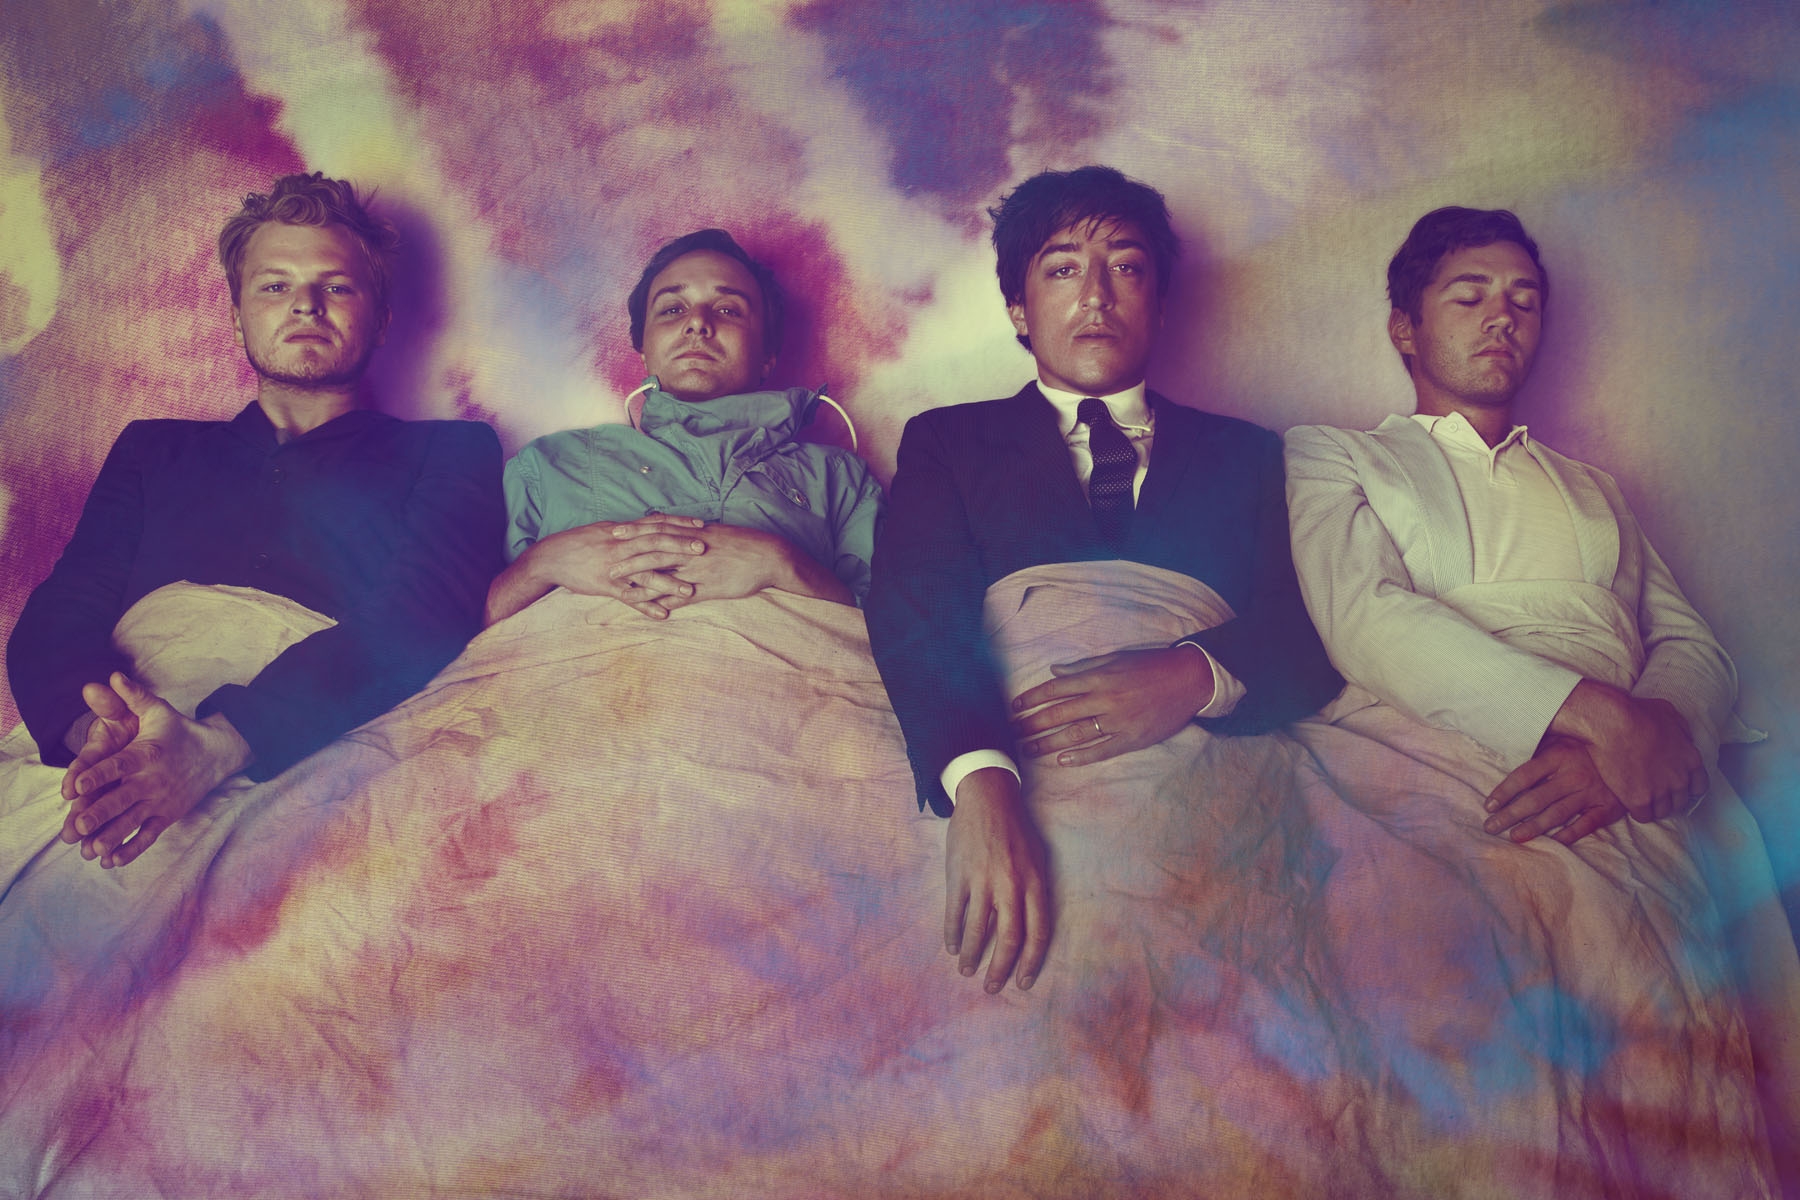 Grizzly Bear: “I really am very disillusioned by this press and review thing”